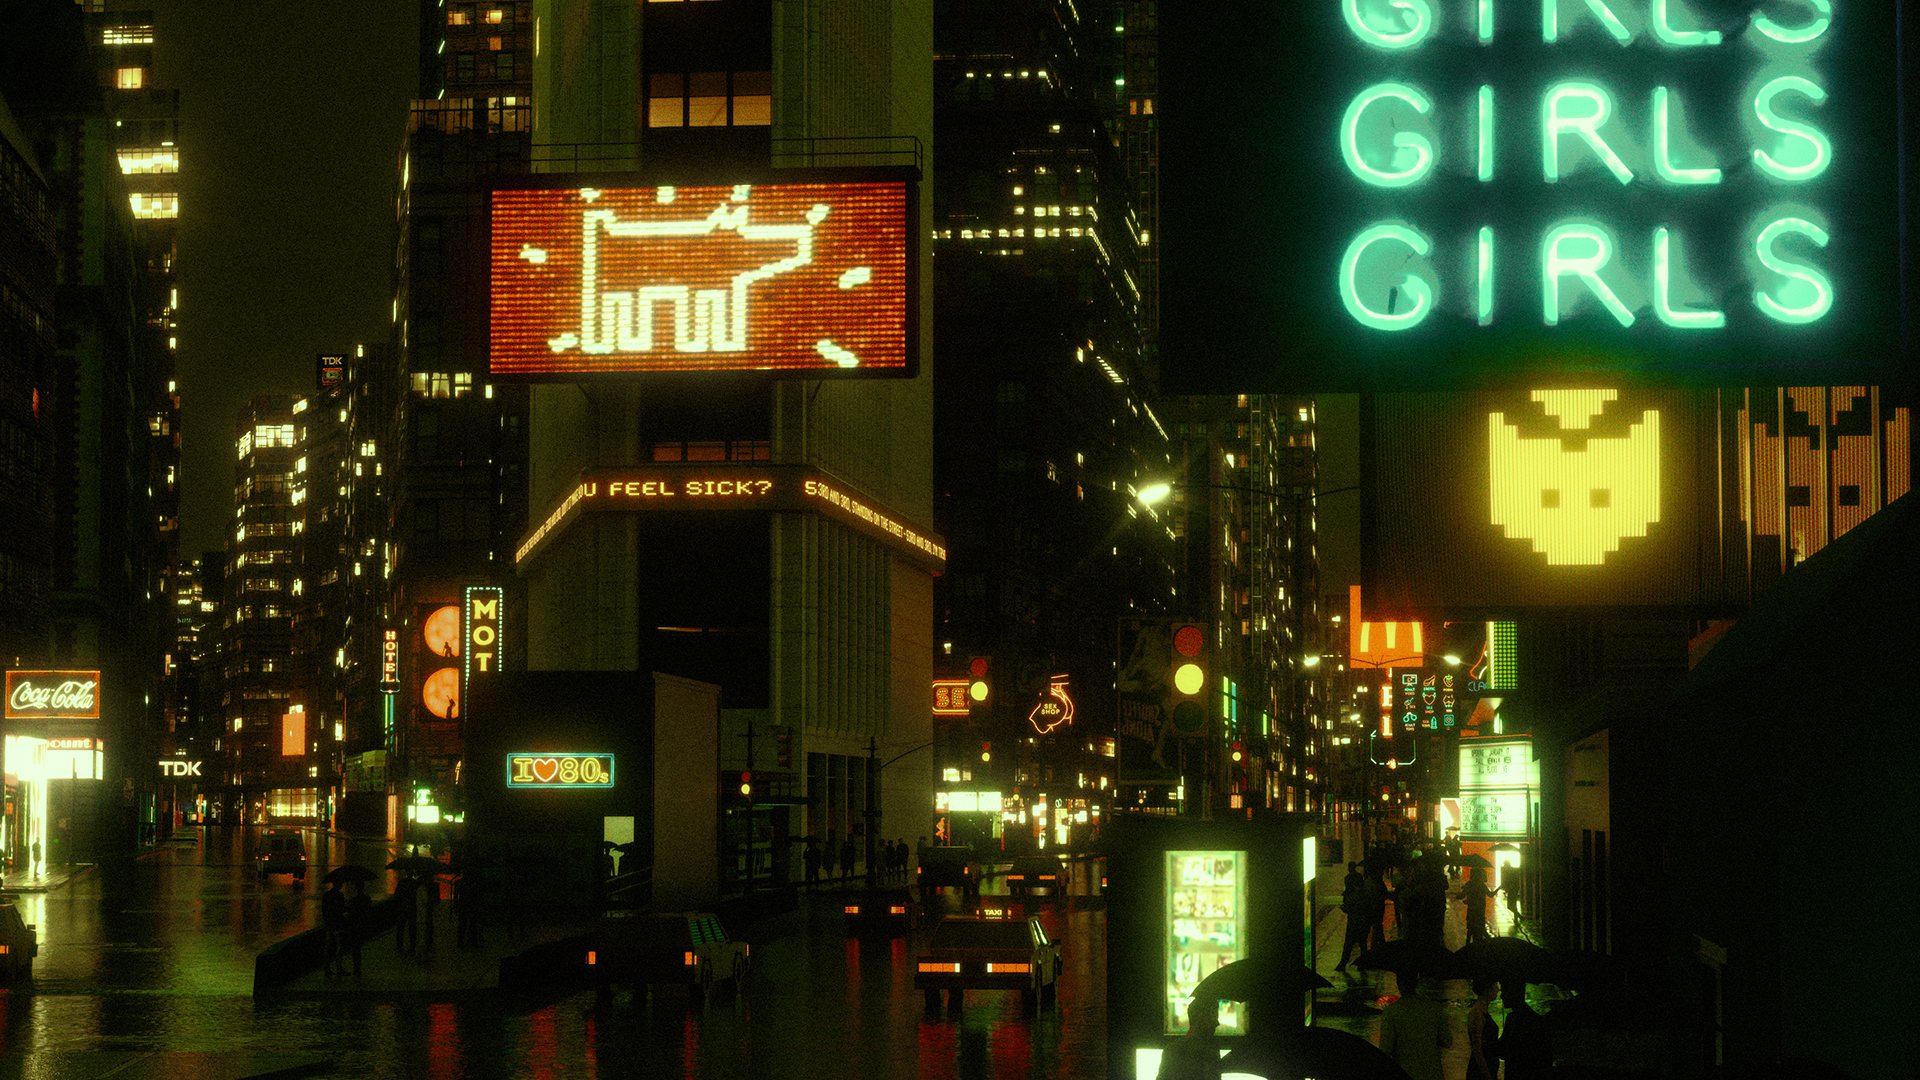 BBC-TimeSquare-80s_0007-1103190025-WIP2-_DeMain_1045.png